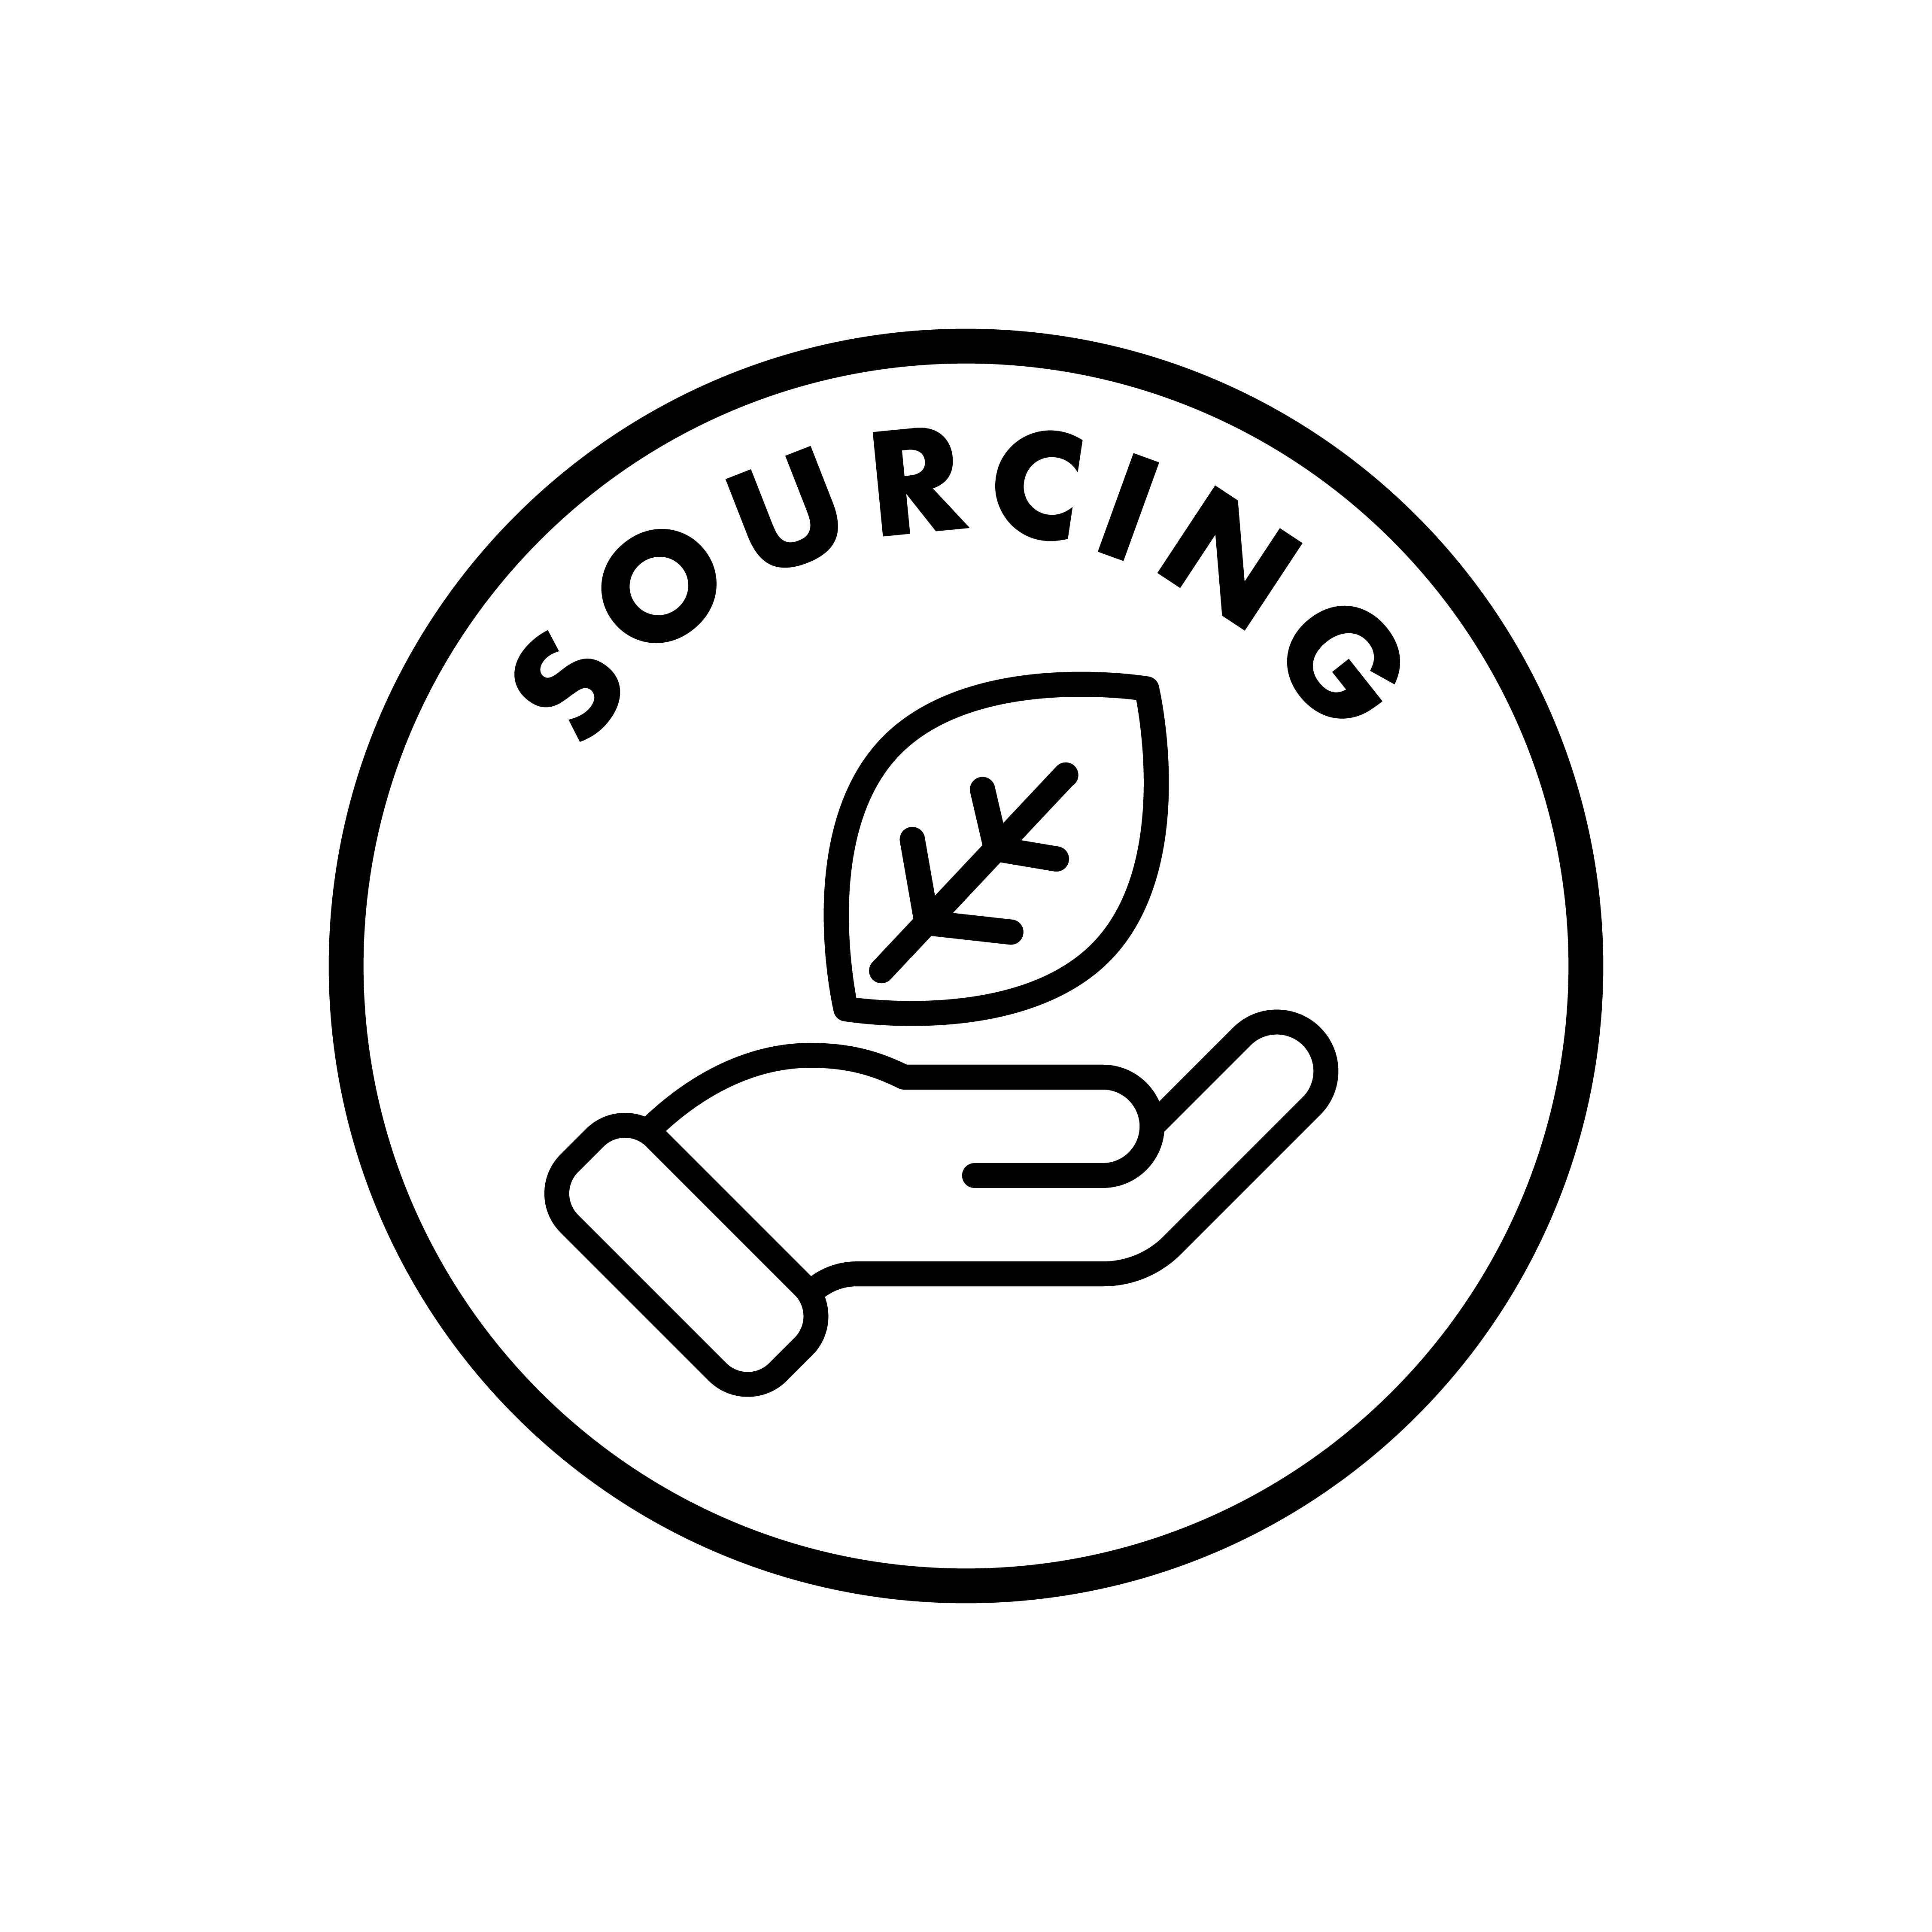 Young Living Seed to Seal sourcing logo.